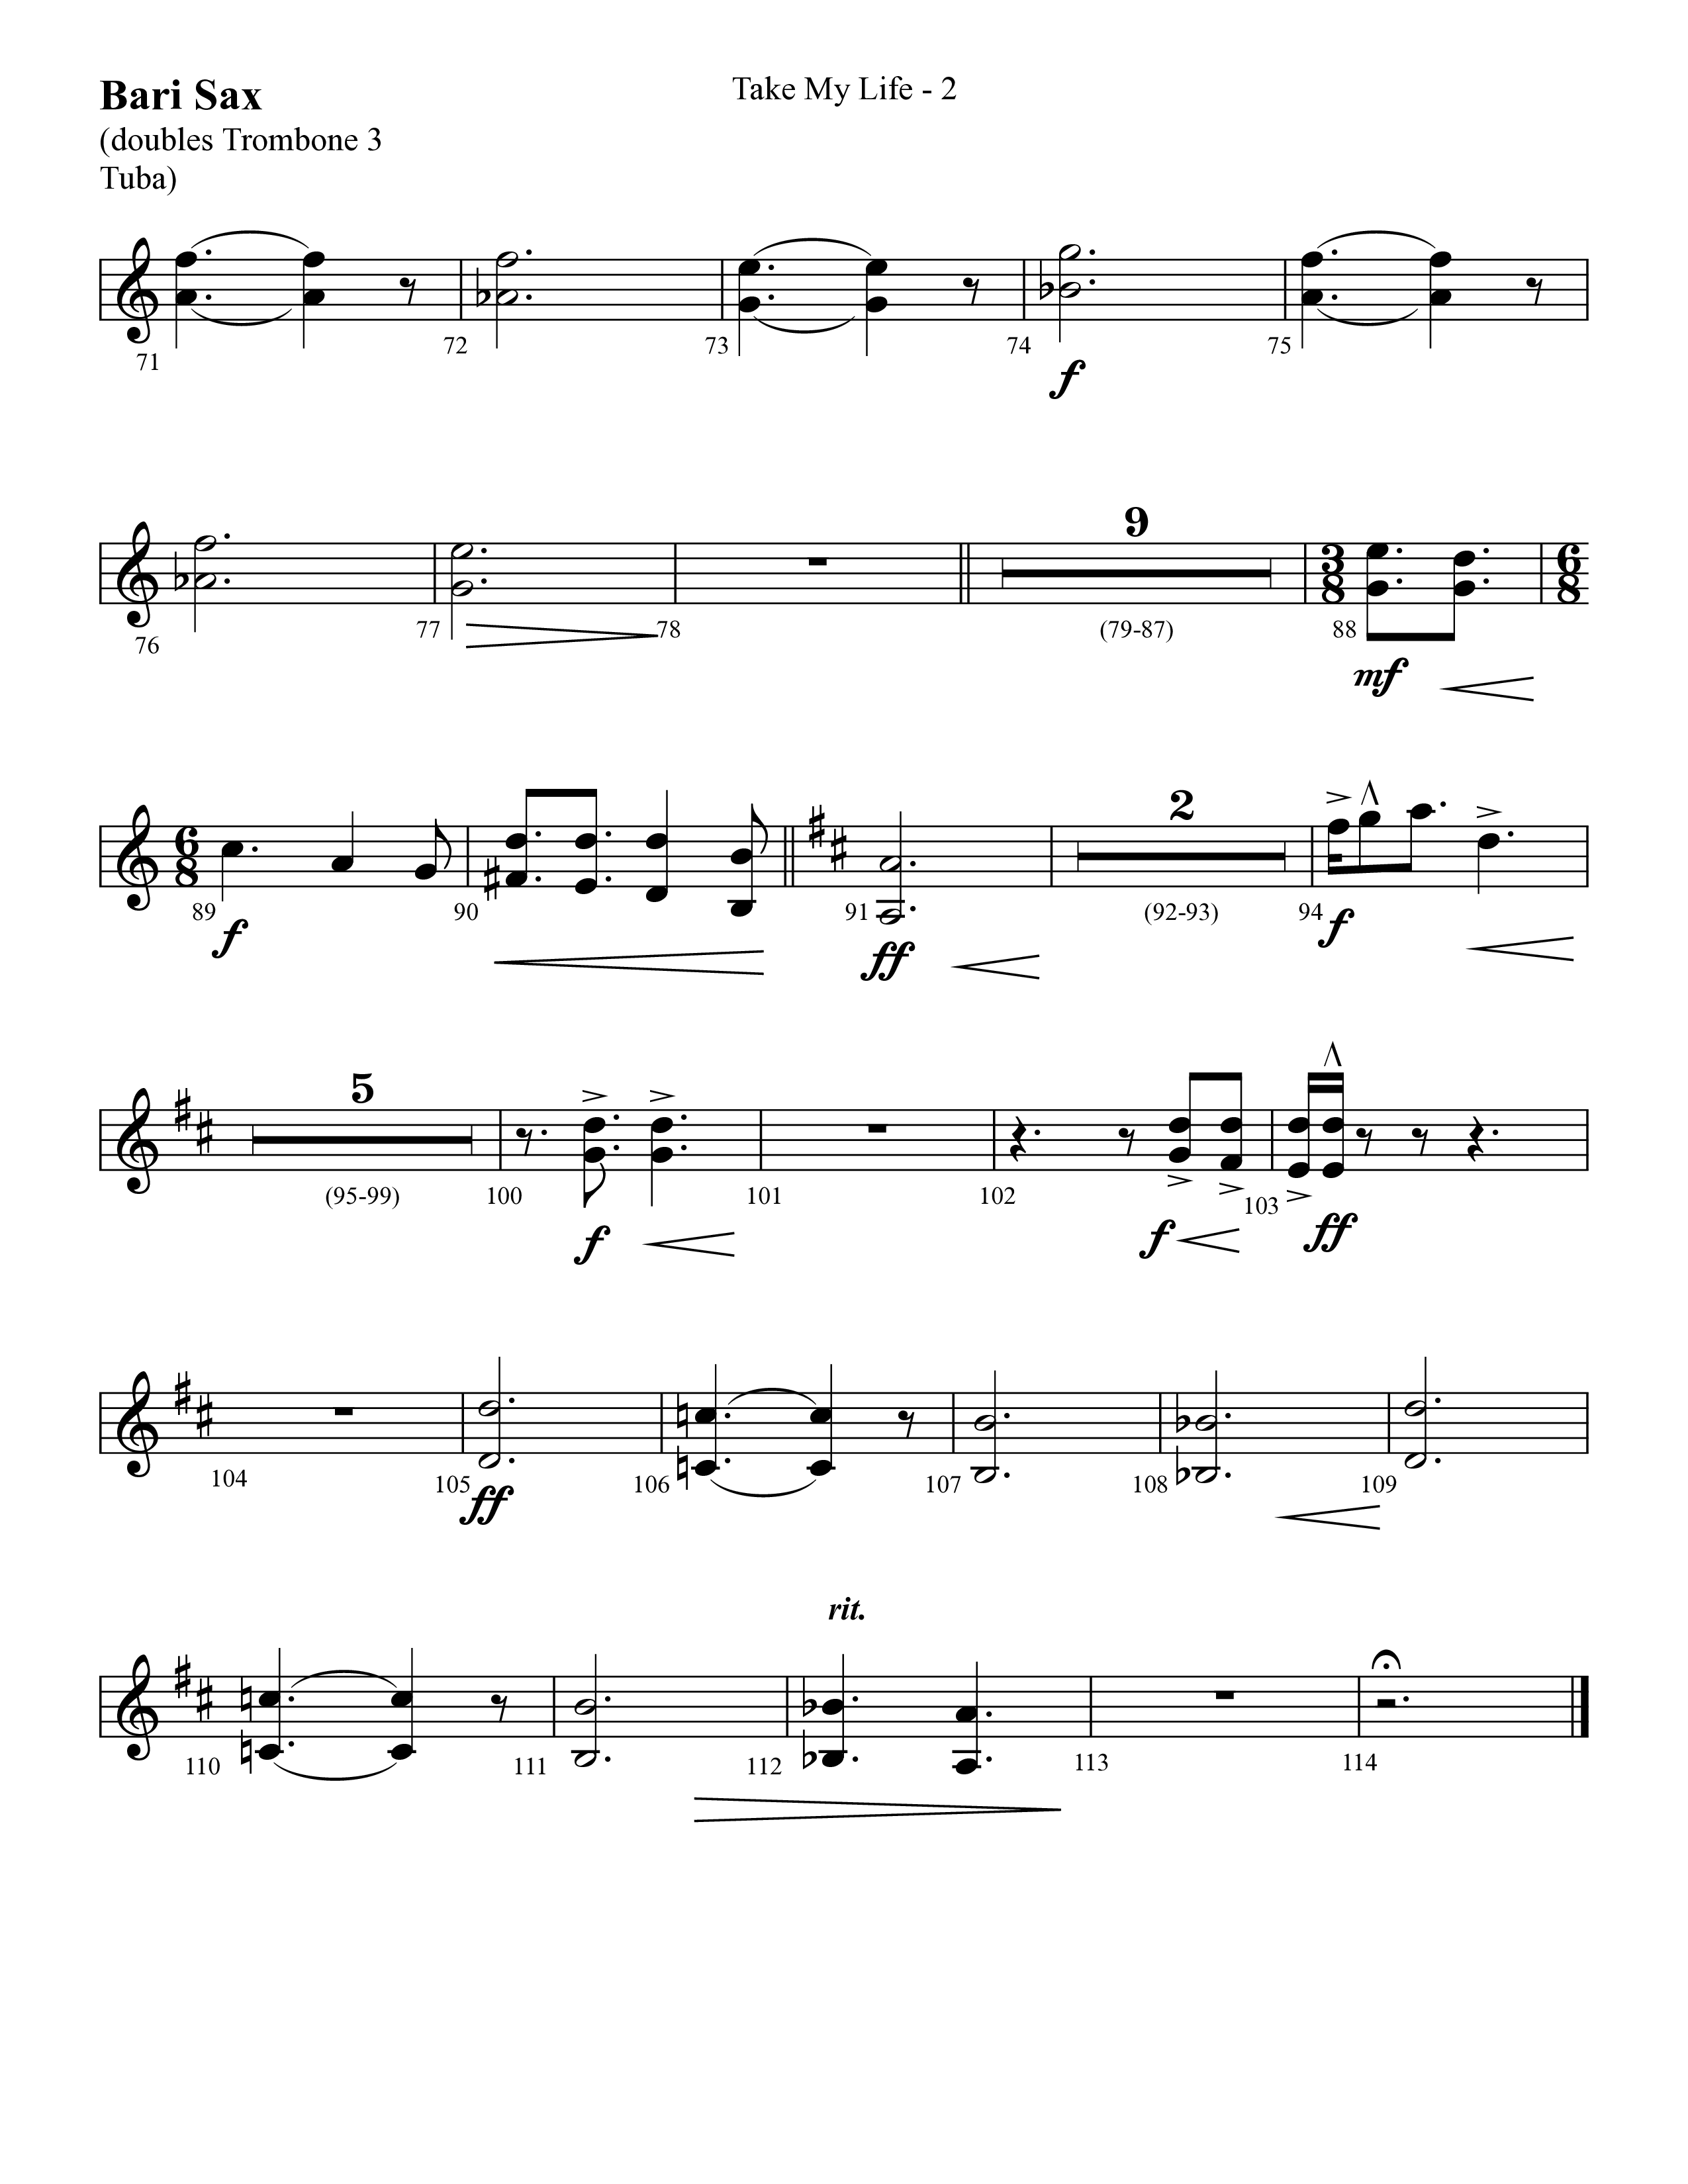 Take My Life (with Take My Life And Let It Be, Take My Life) (Choral Anthem SATB) Bari Sax (Lifeway Choral / Arr. Cliff Duren)